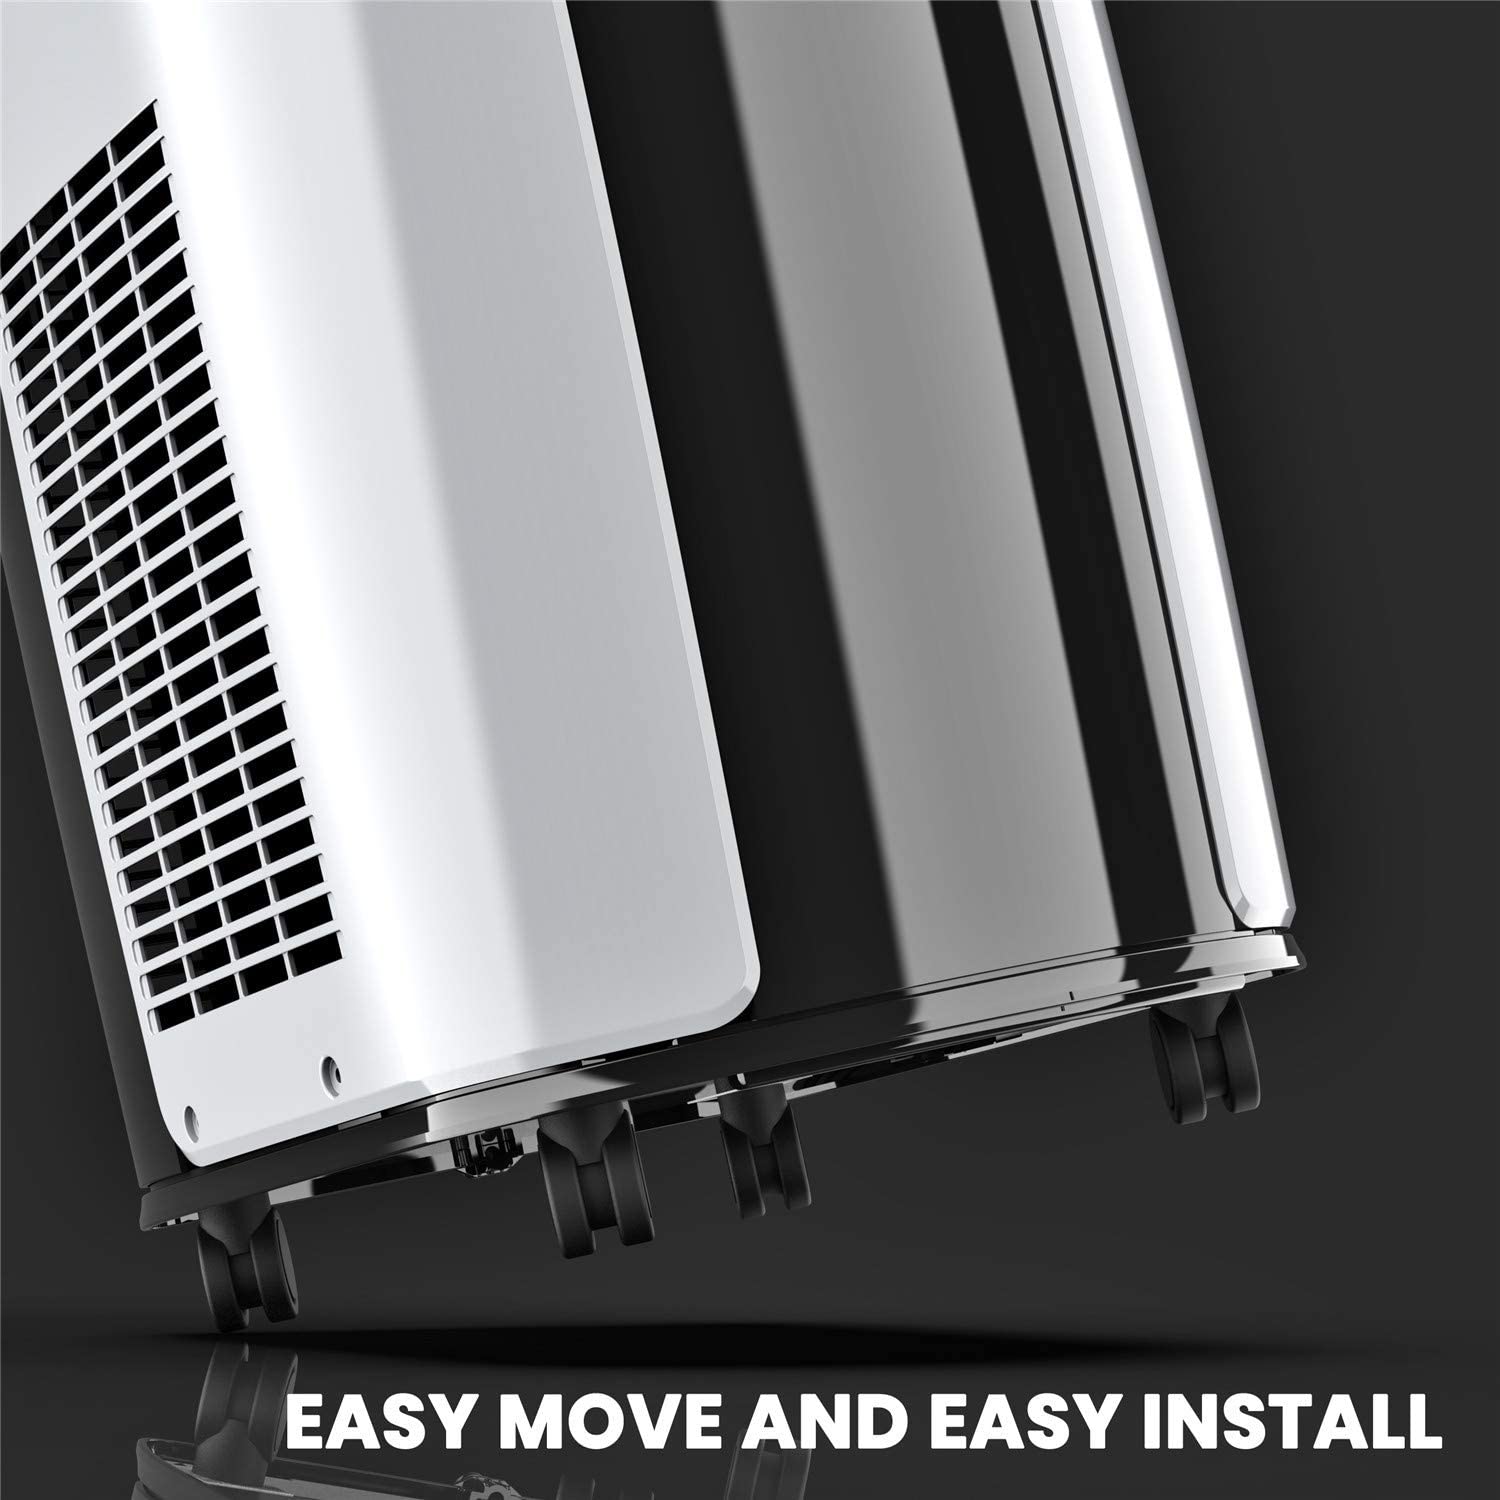 10 BEST 8000 BTU PORTABLE AIR CONDITIONER 2022 REVIEW All In One Cooling Gear Lab: Any Refrigerators Air Conditioners Freezers Ice Makers Coolers Fans Reviewed And Compared.